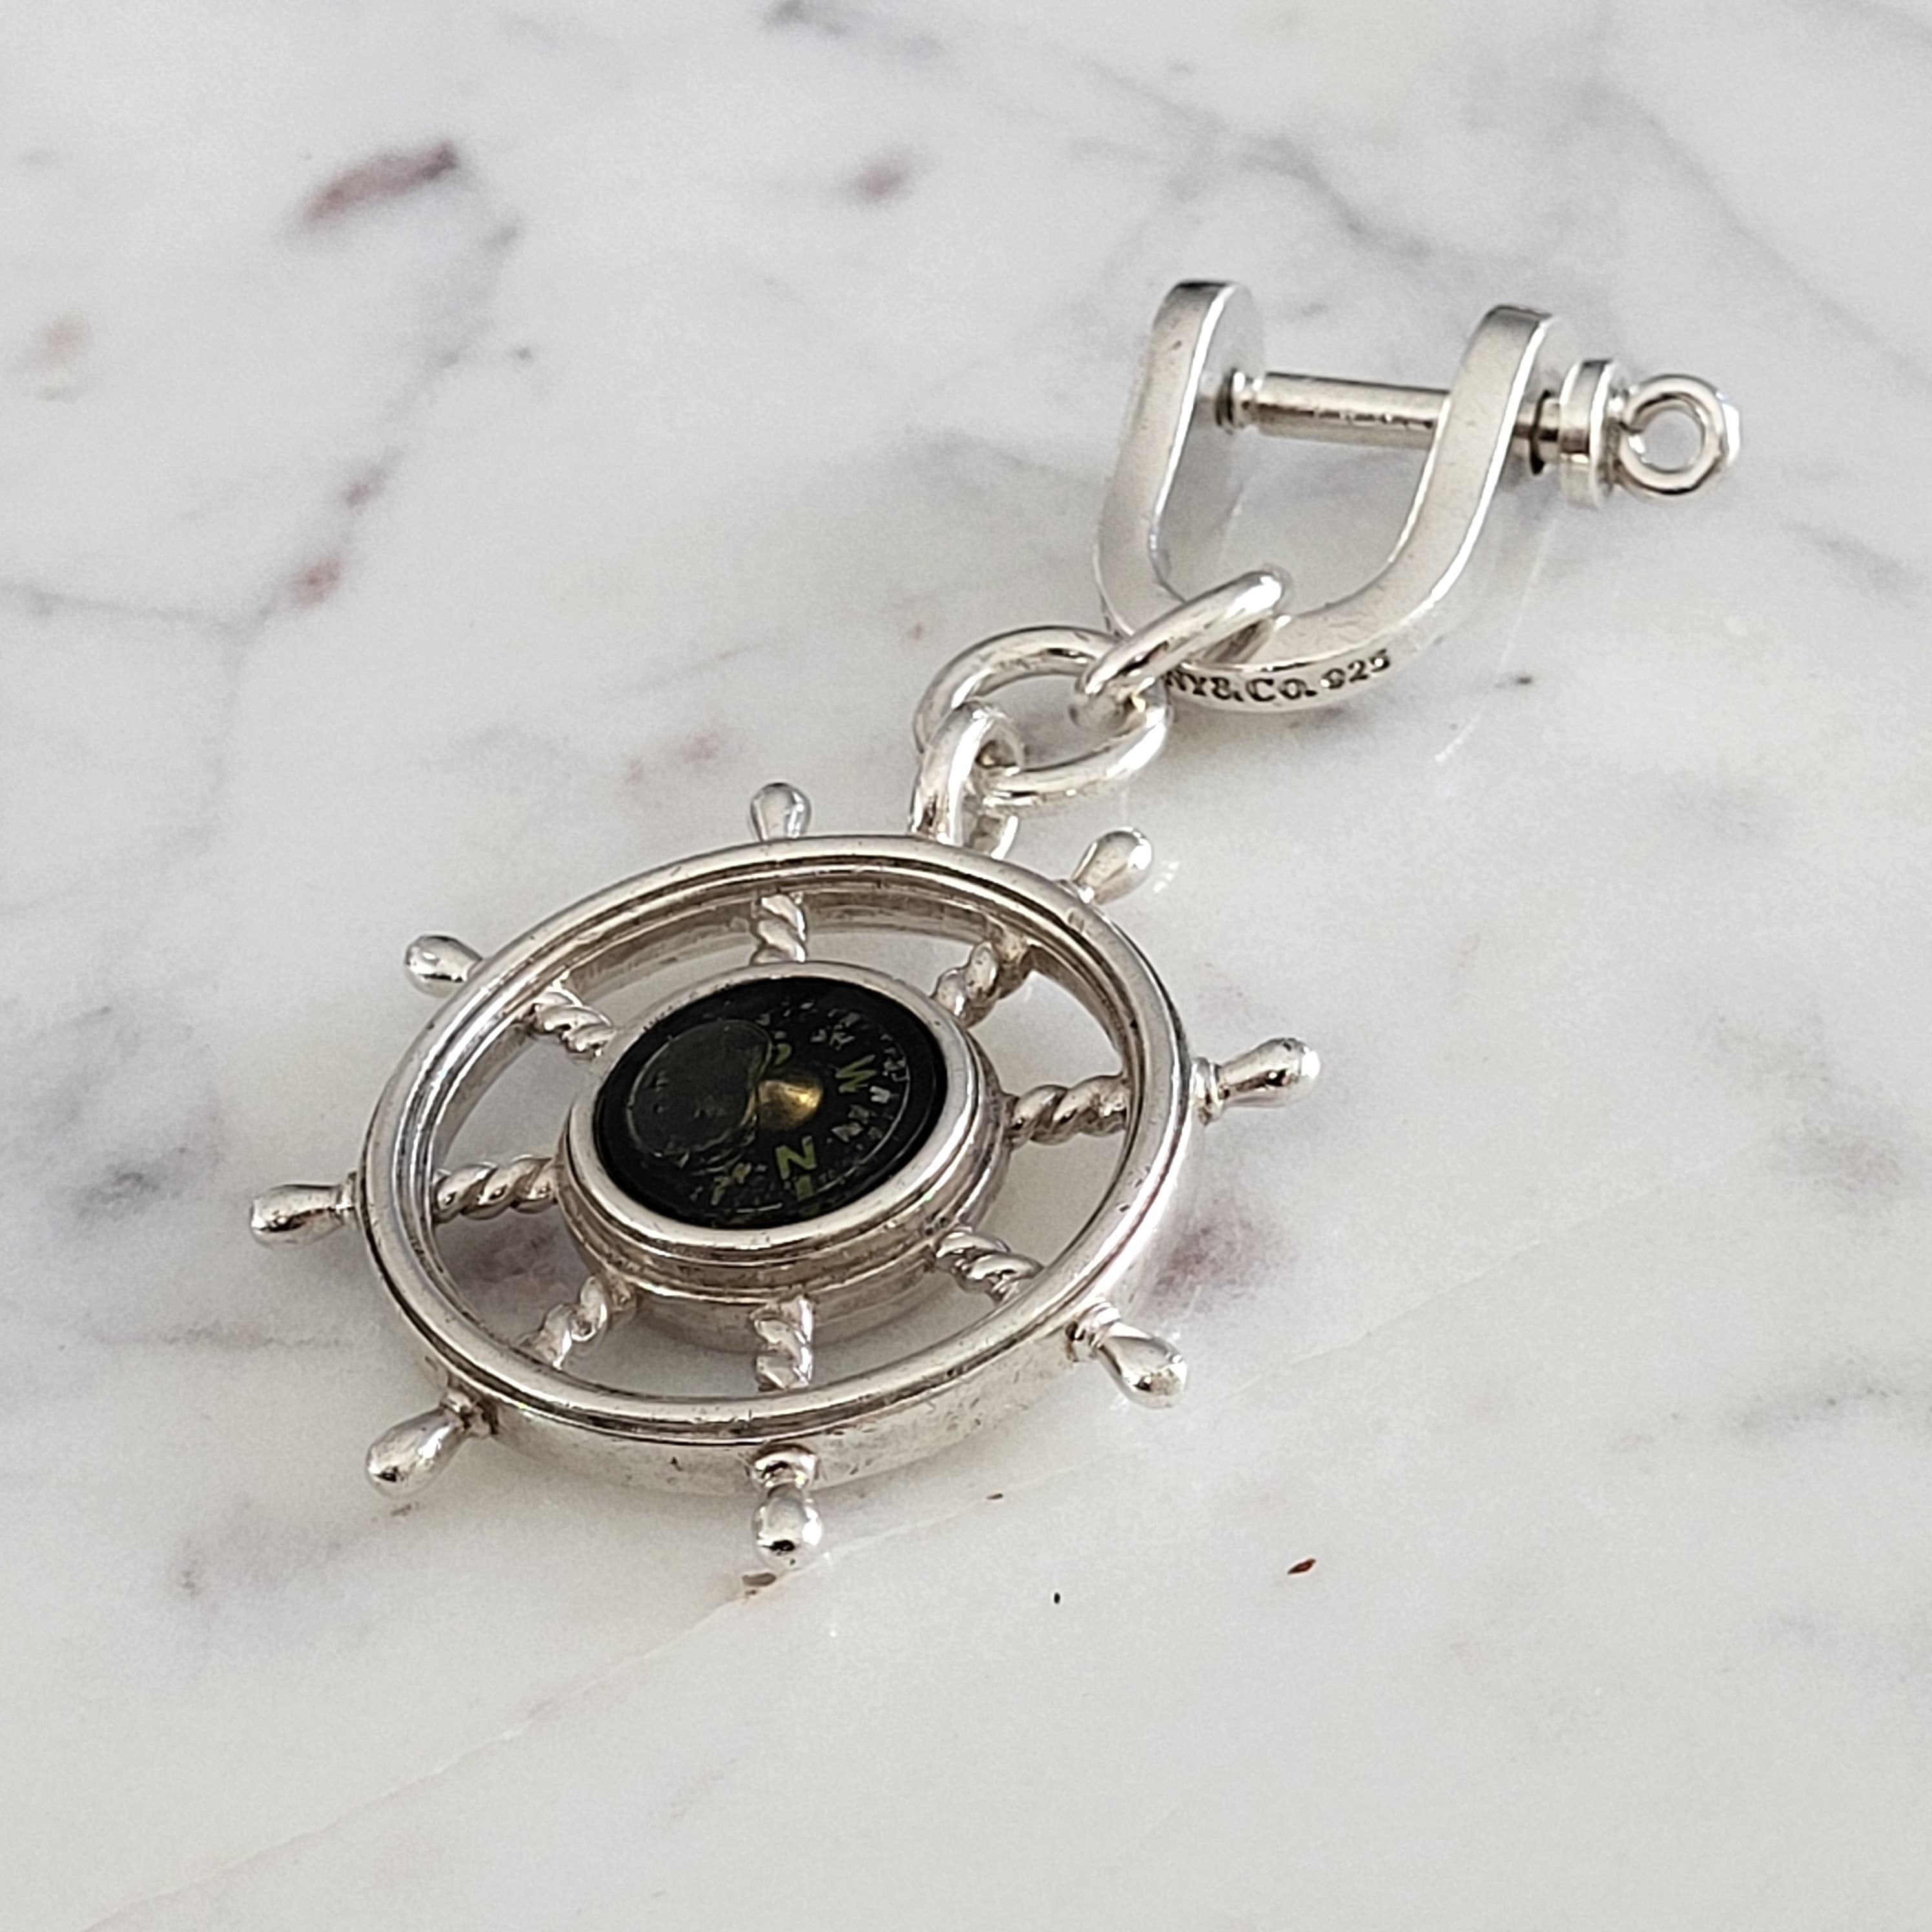 SIlver and Compass Charm with diamond